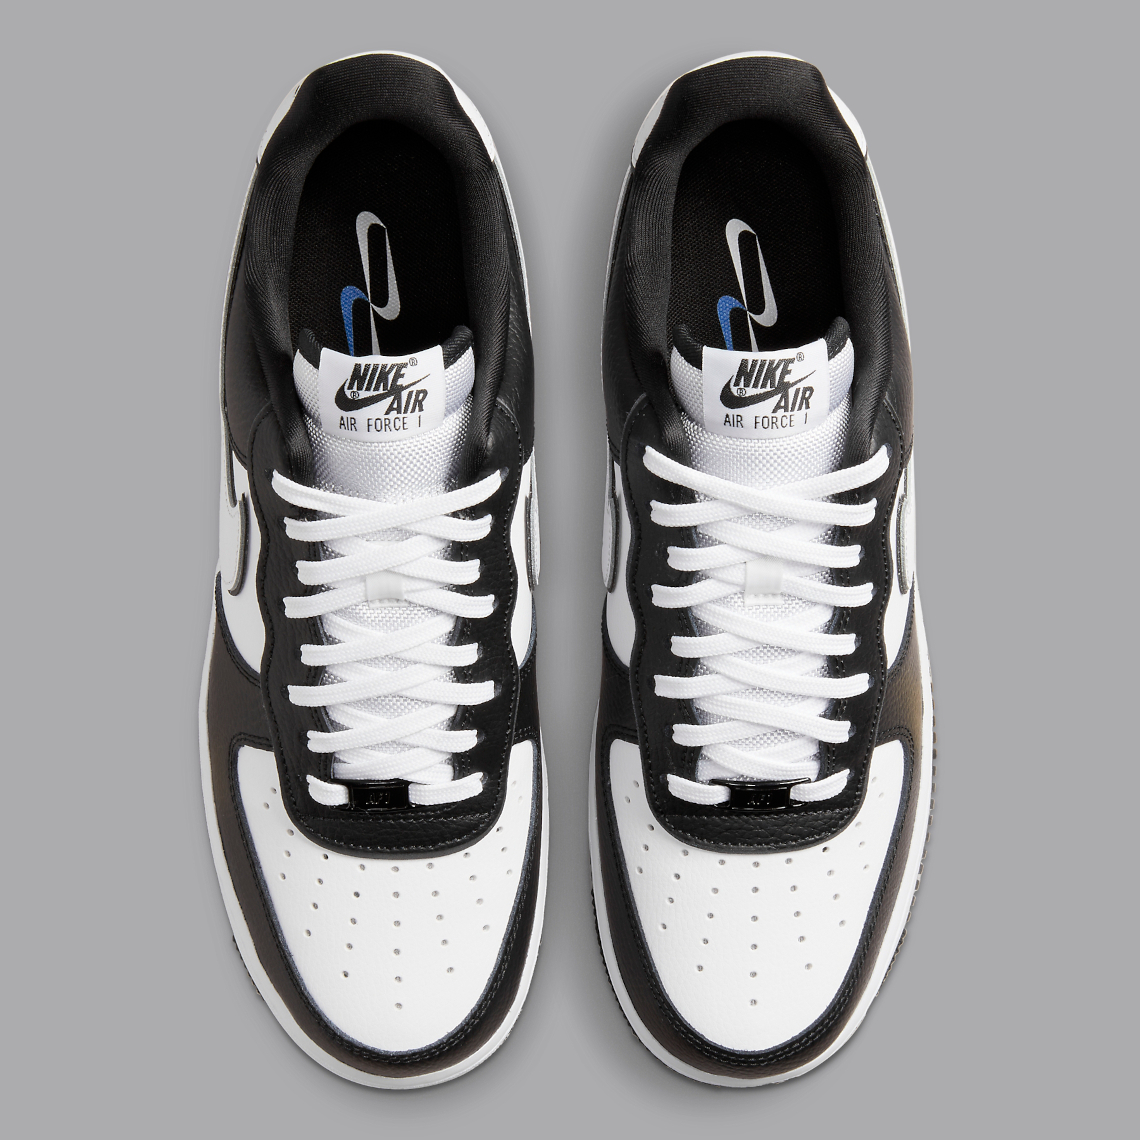 Nike Air Force 1 Low White/Black DX3115-100